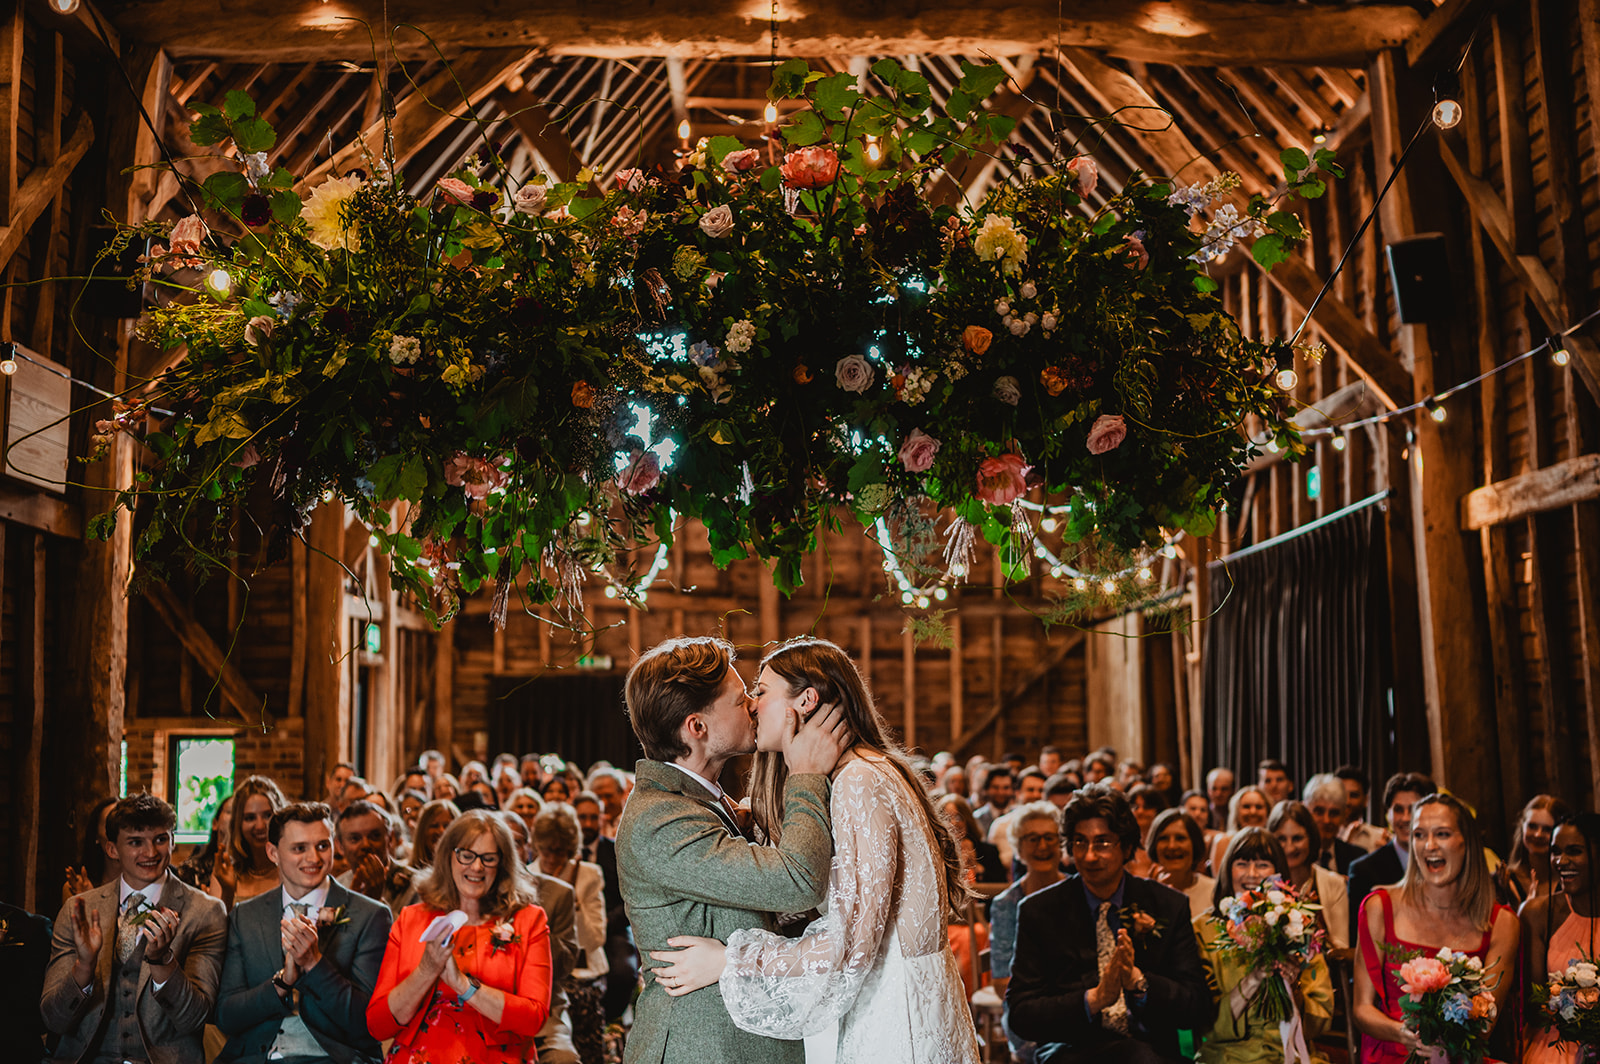 A bride and groom share a first kiss under some flowers at Barns at Redcoats